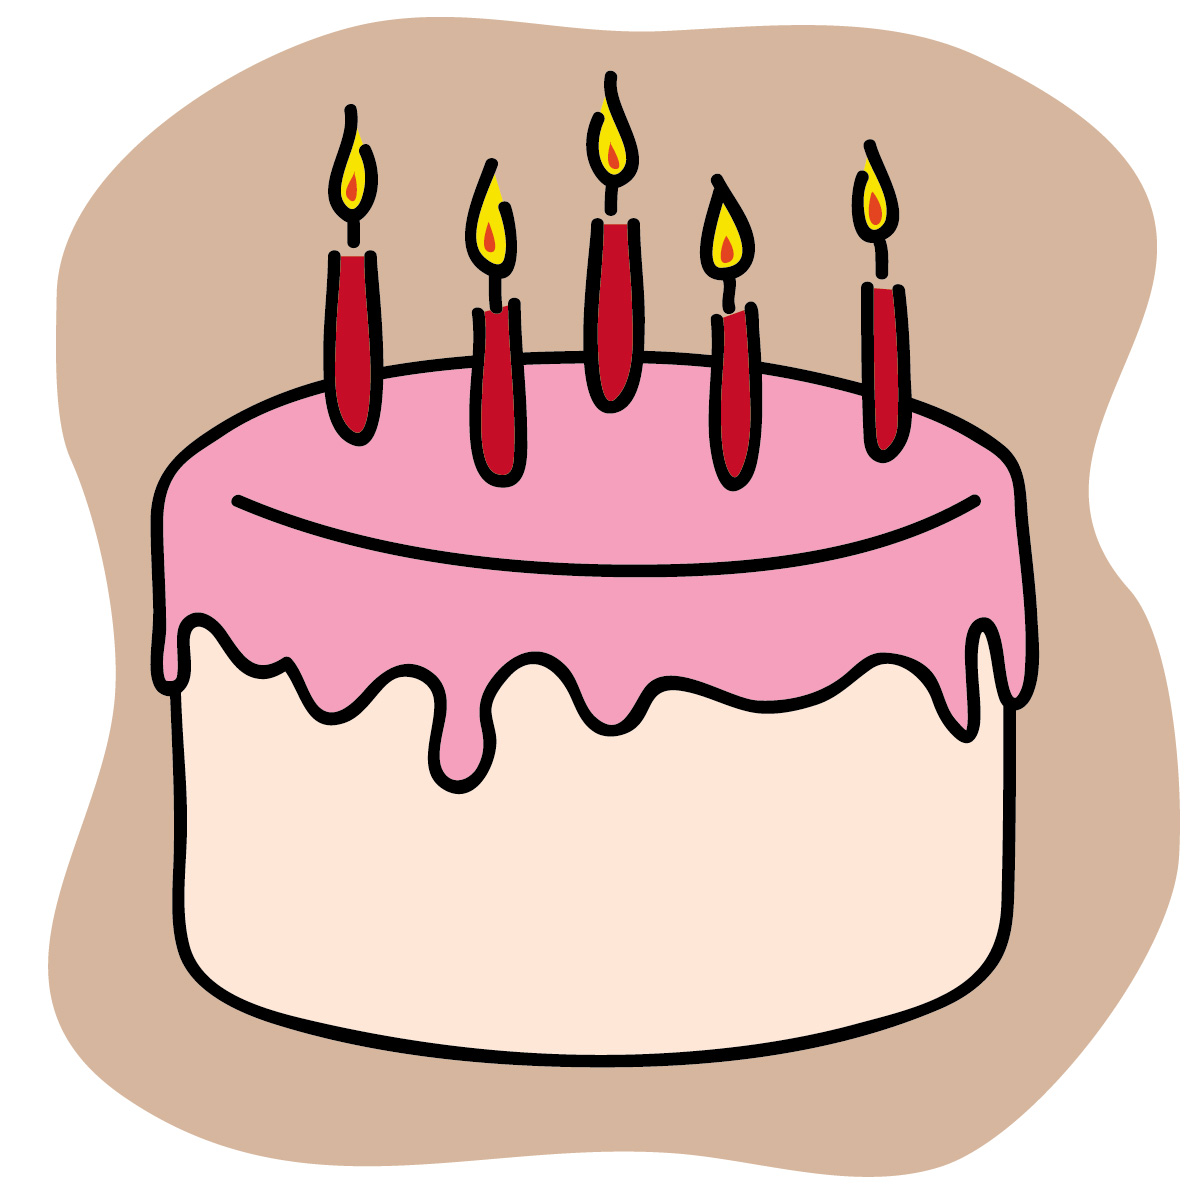 Happy Birthday Cake With Name Edit For Facebook Clip Art 